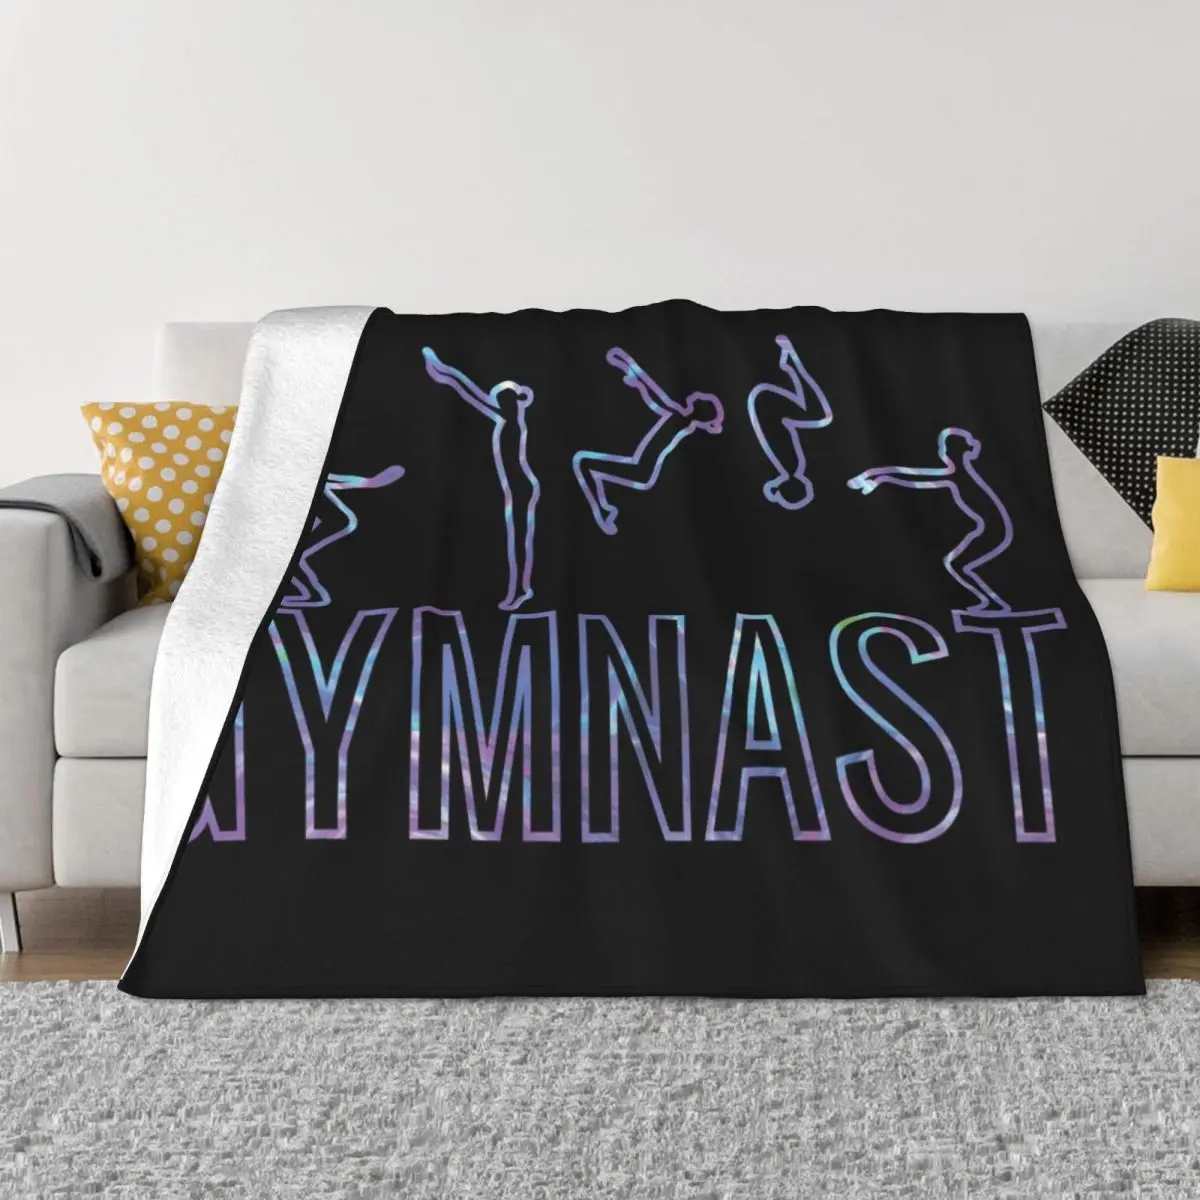 

Gymnast - Holographic Throw Blanket Beautifuls Decorative Sofas Blankets For Bed Blankets